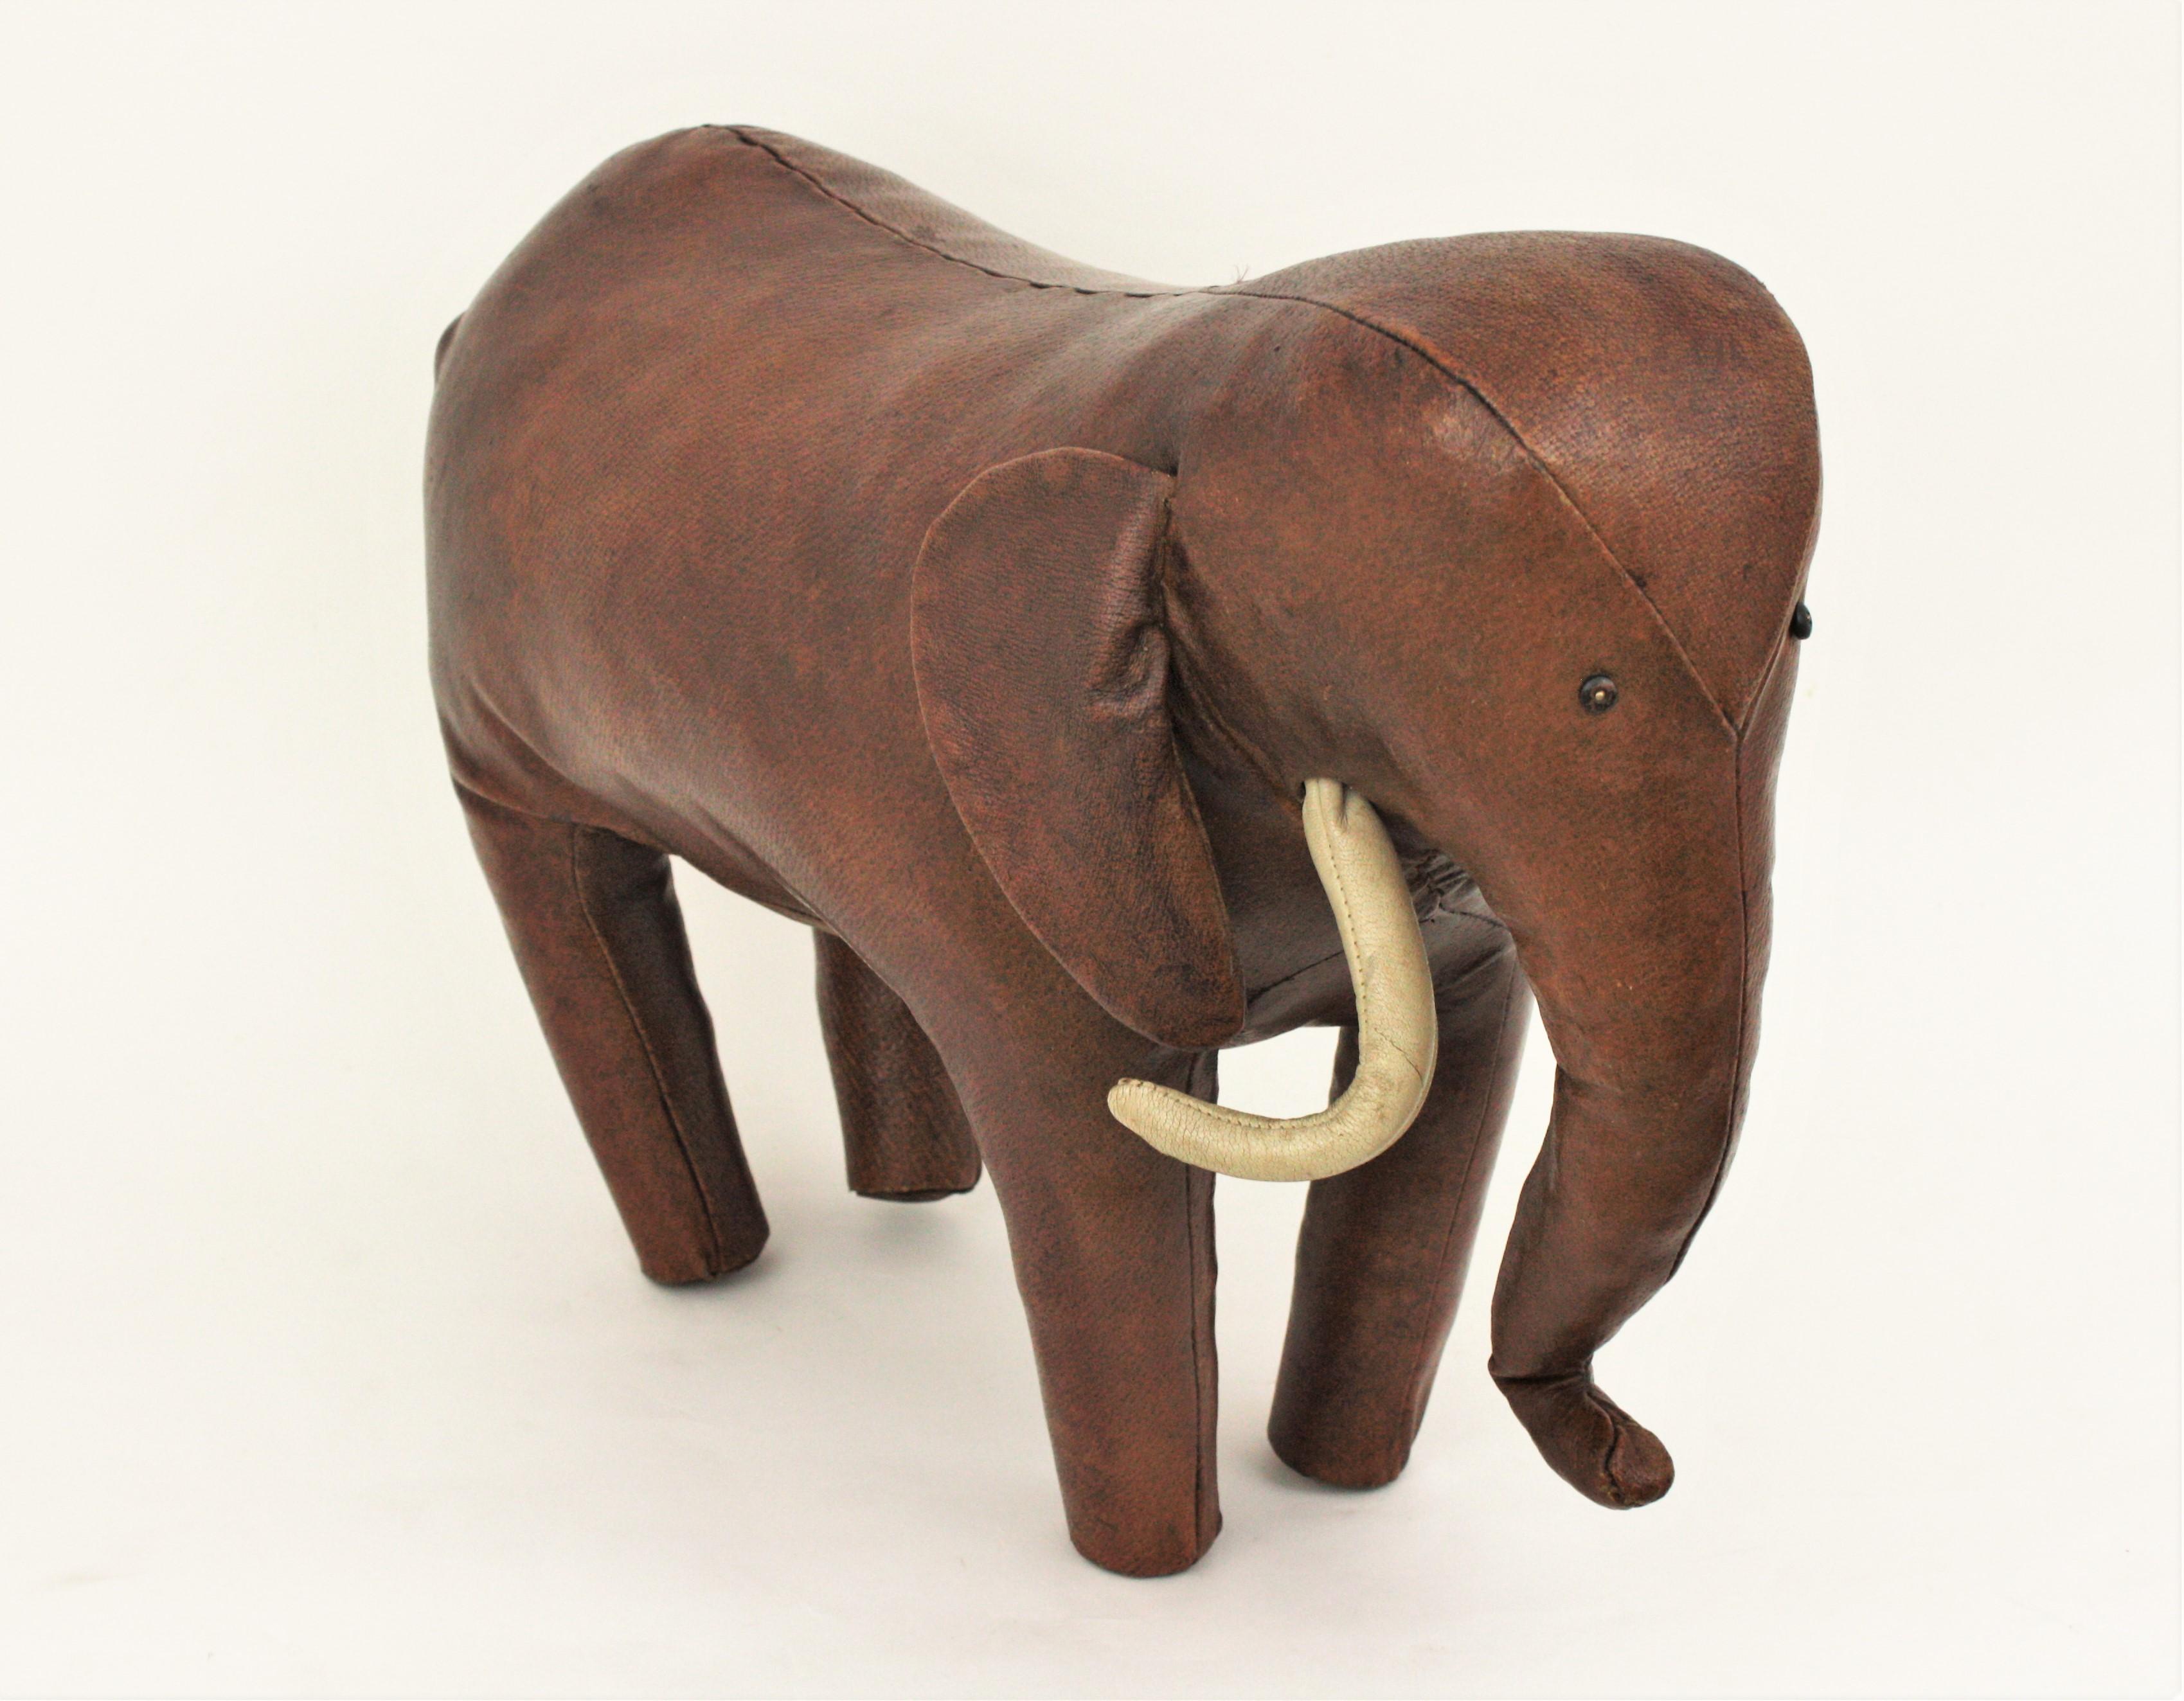 Leather Elephant Large Stool by Dimitri Omersa for Abercrombie in brown leather, 1960s